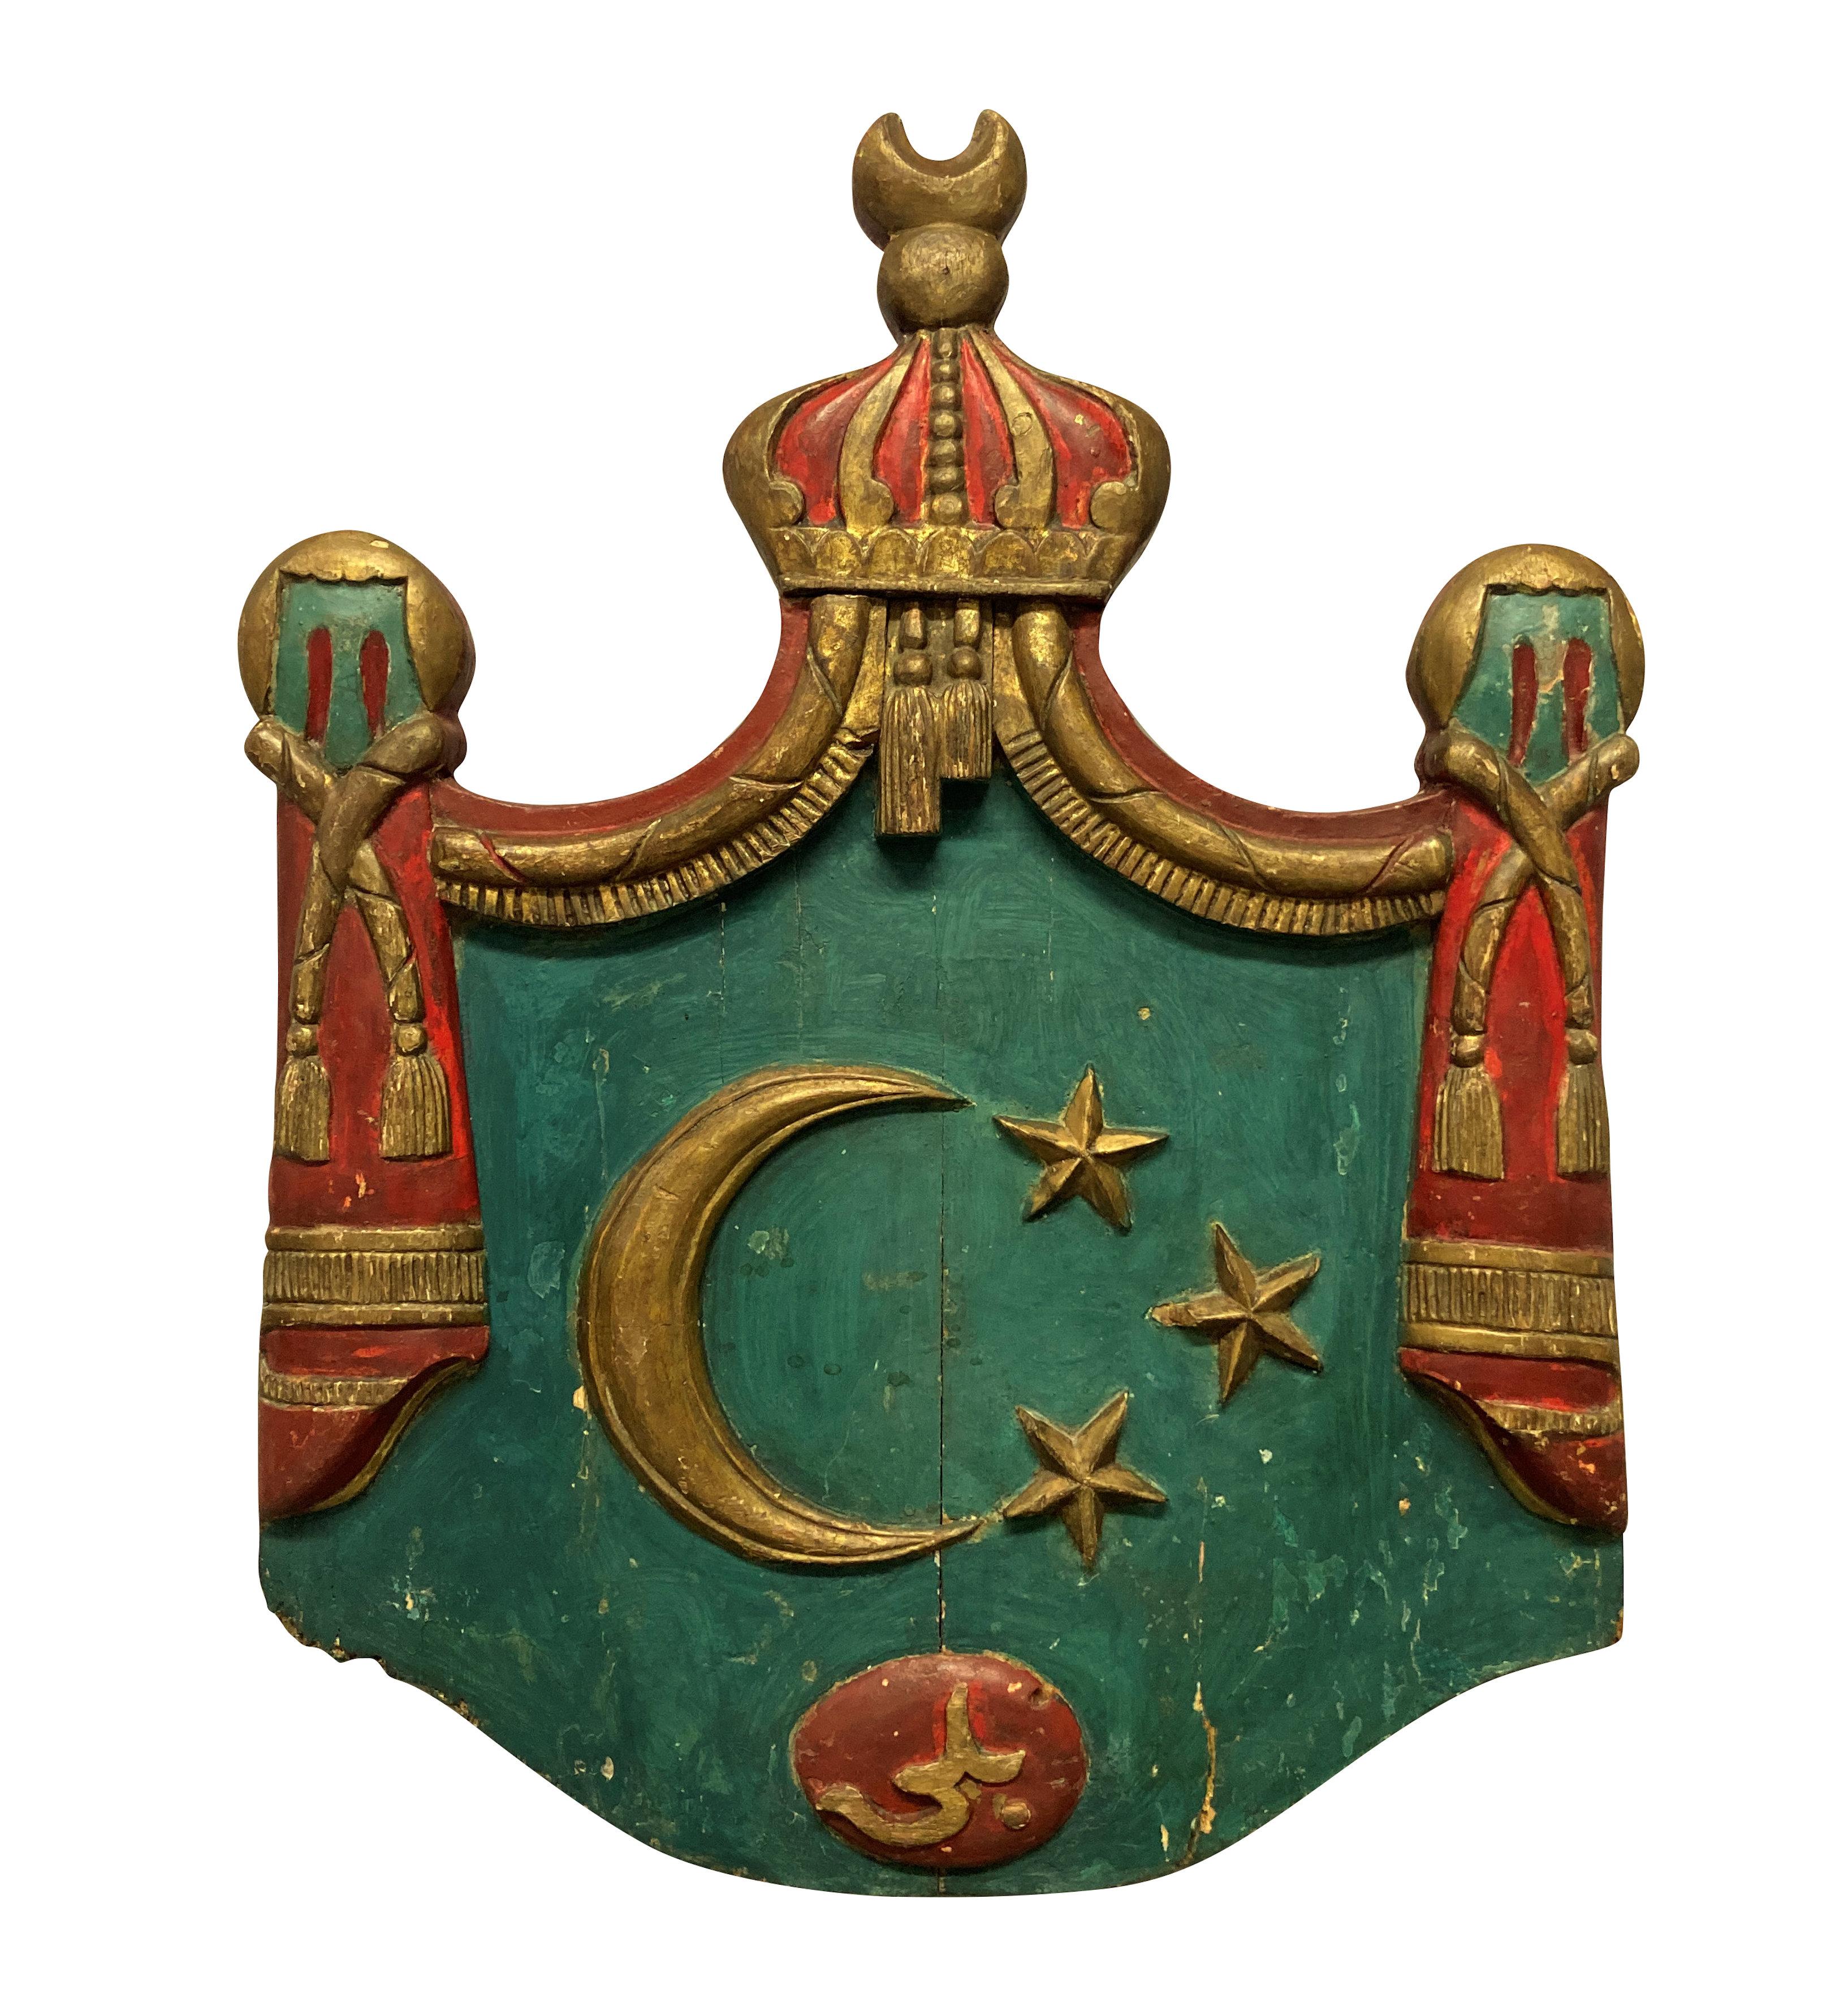 A pair of rare Islamic coats of arms from the Muhammad Ali Dynasty of Egypt. One shield depicting the arms of Muad I and the other Farouk I. In striking polychrome paints.

Provenance: Hotel Drouot-Richelieu, Paris

Measure: 86cm high x 59cm